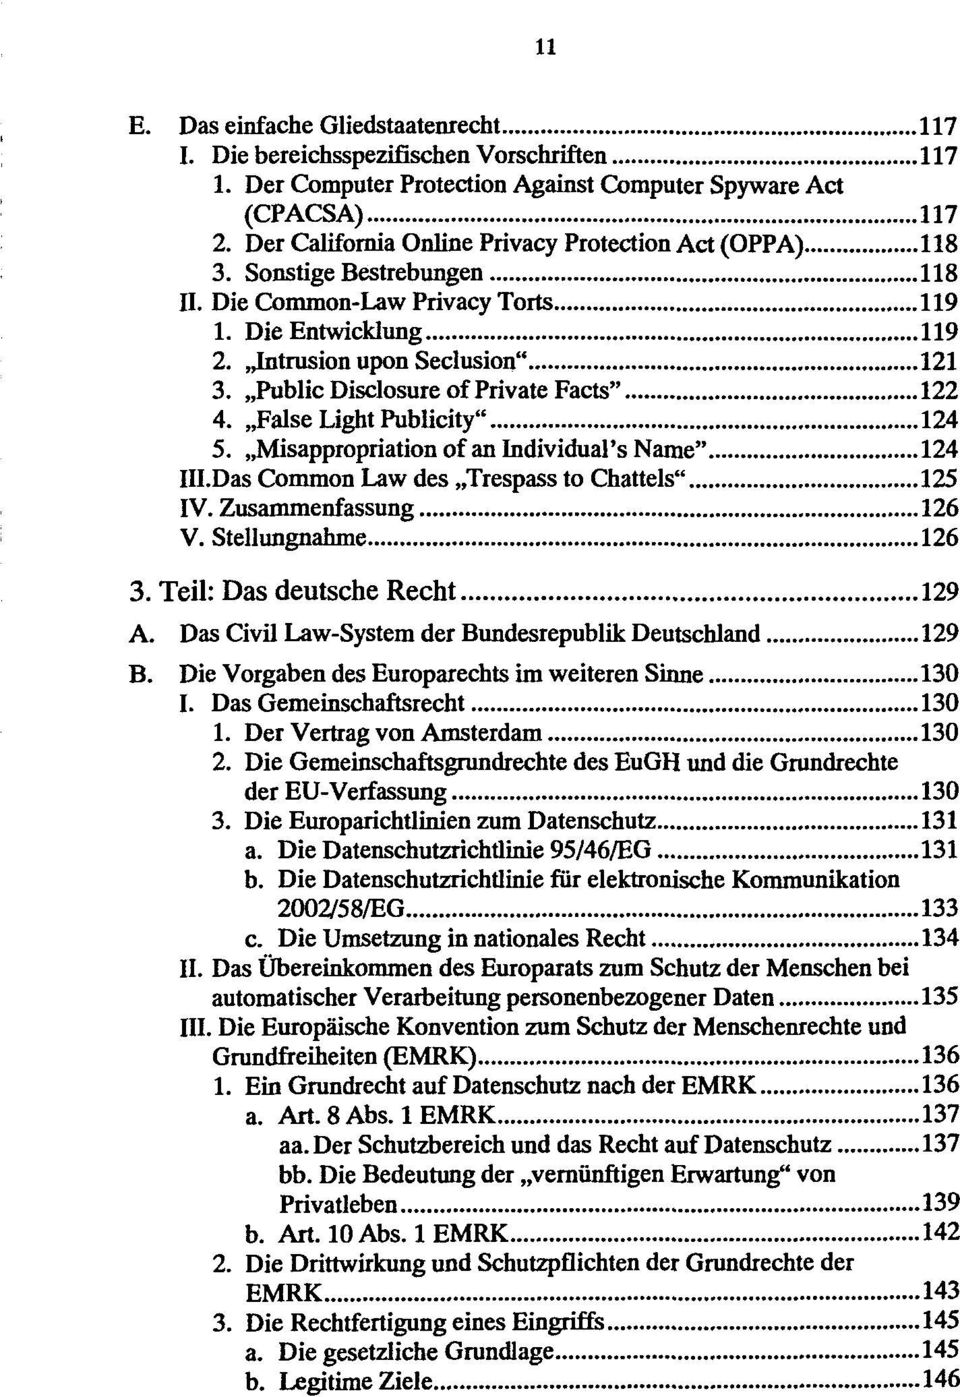 Public Disclosure of Private Facts" 122 4. False Light Publicity" 124 5. Misappropriation of an Lndividual's Name" 124 III.Das Common Law des Trespass to Chatteis" 125 IV. Zusammenfassung 126 V.